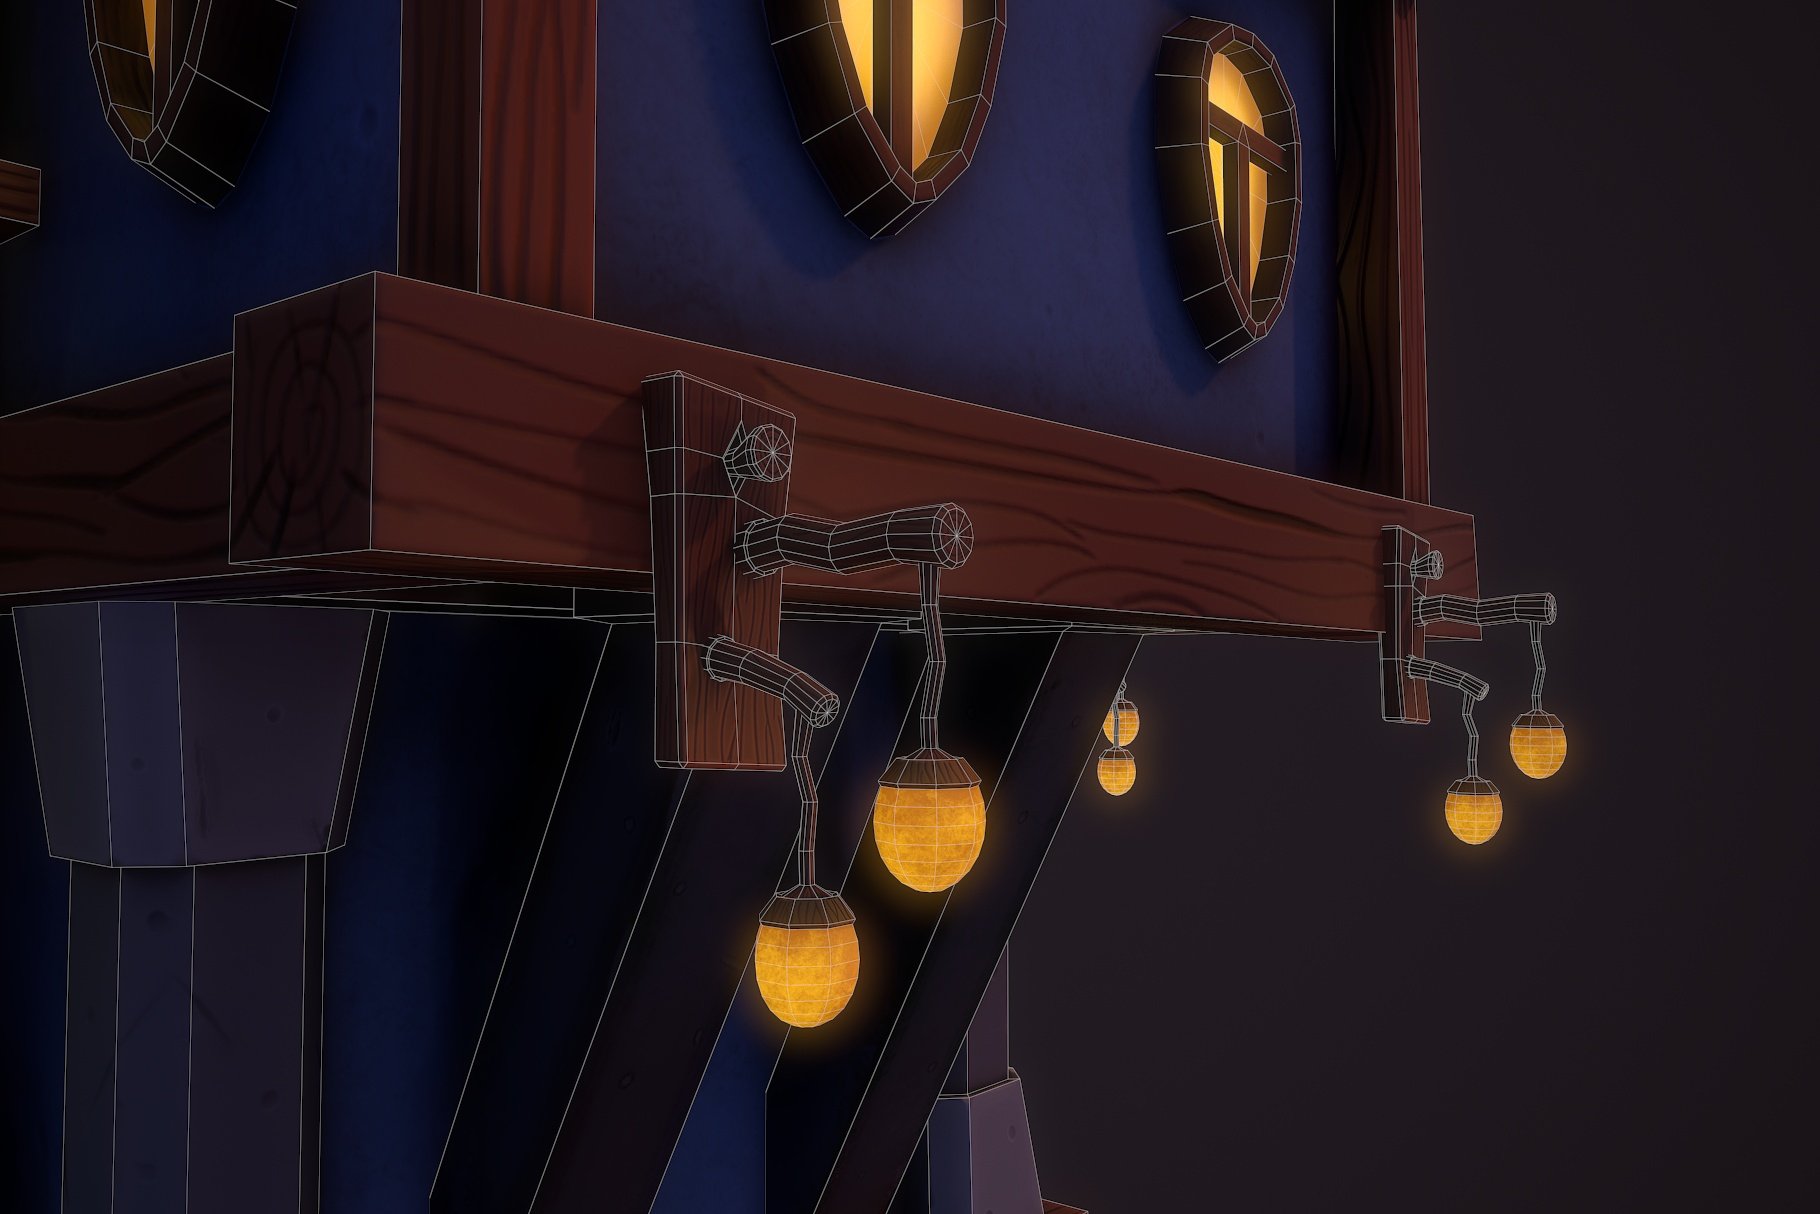 Close-up graphic mockup of fantasy teapot house lights.